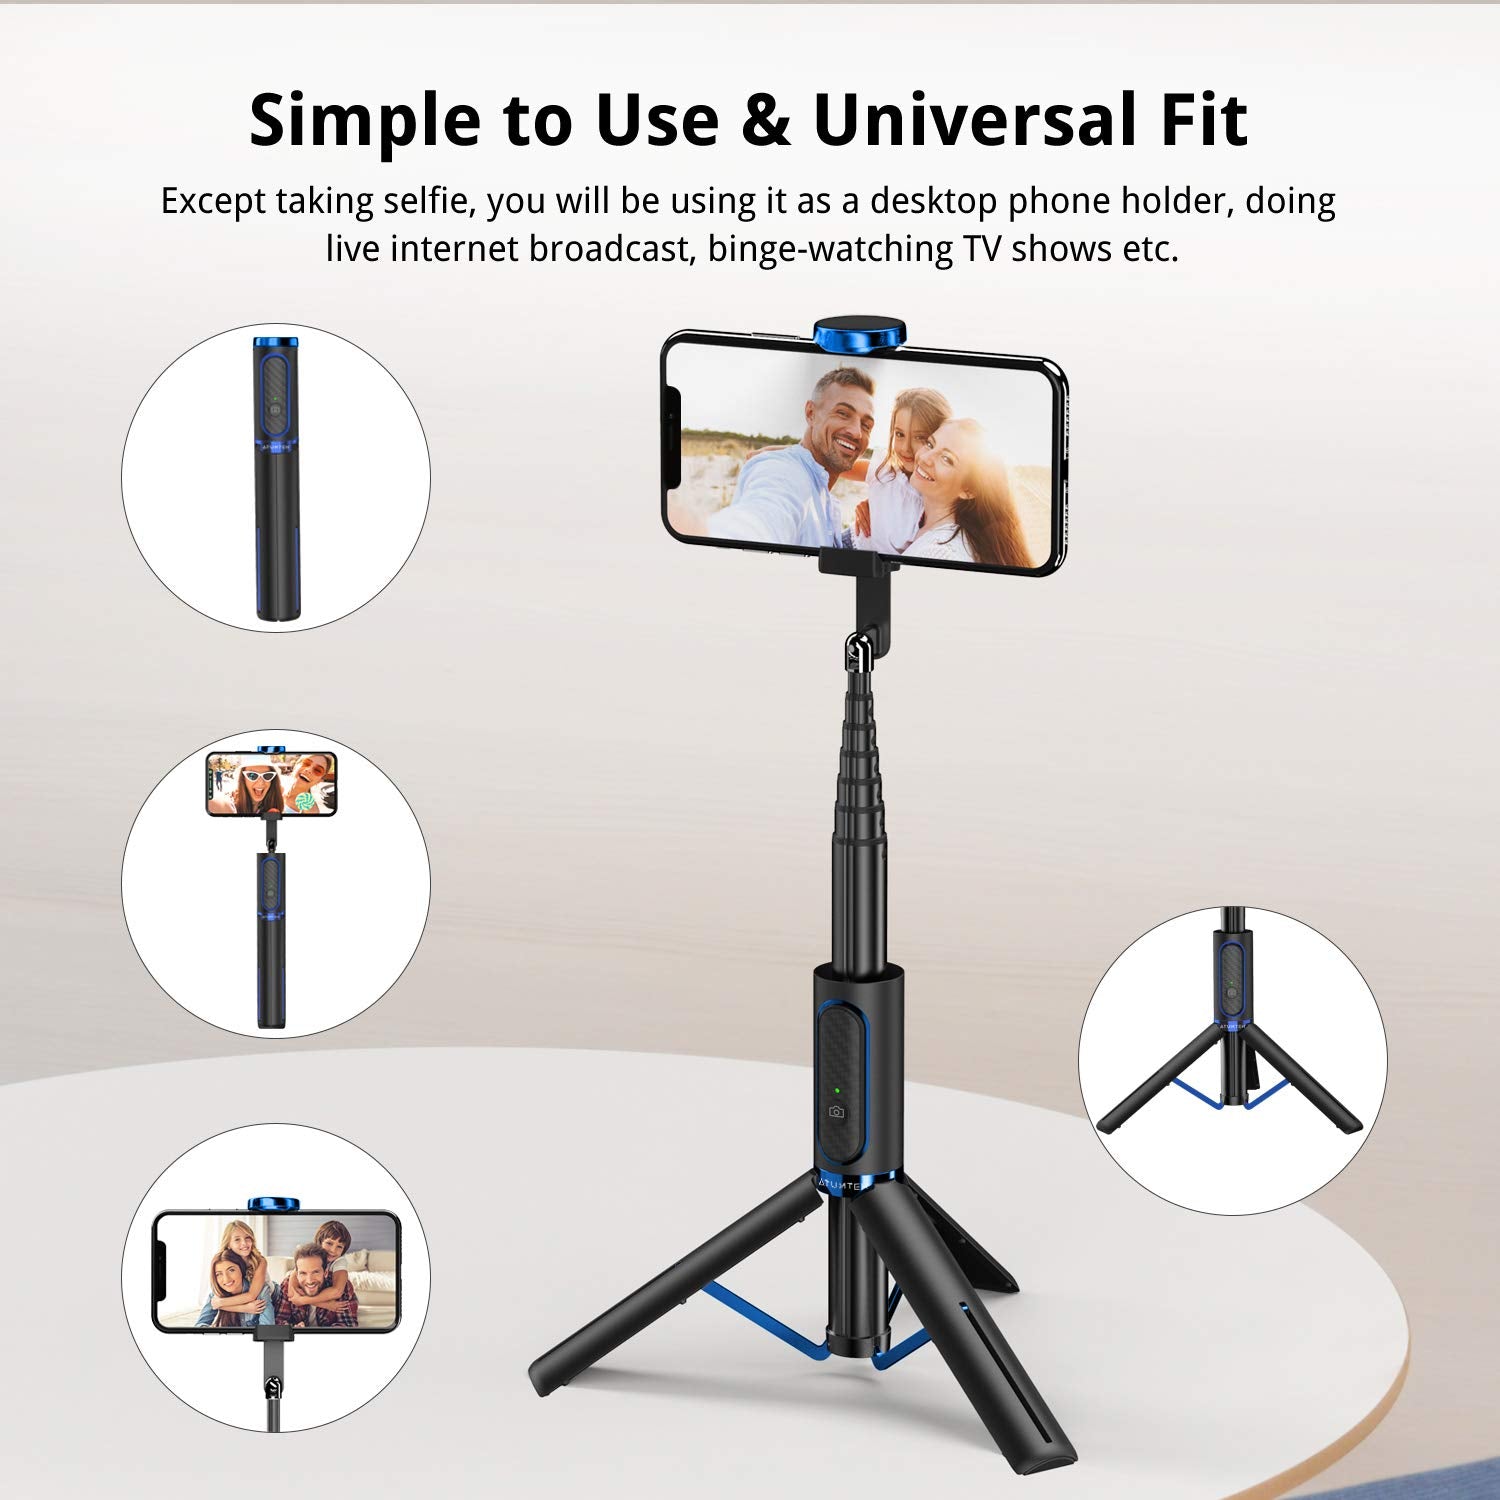 ATUMTEK Selfie Stick Tripod, Extendable 3 in 1 Aluminum Bluetooth Selfie Stick with Wireless Remote for iPhone 13/13 Pro/12/11 Pro/XS Max/XS/XR/X/8/7, Samsung Huawei LG Google Sony Smartphones, Blue